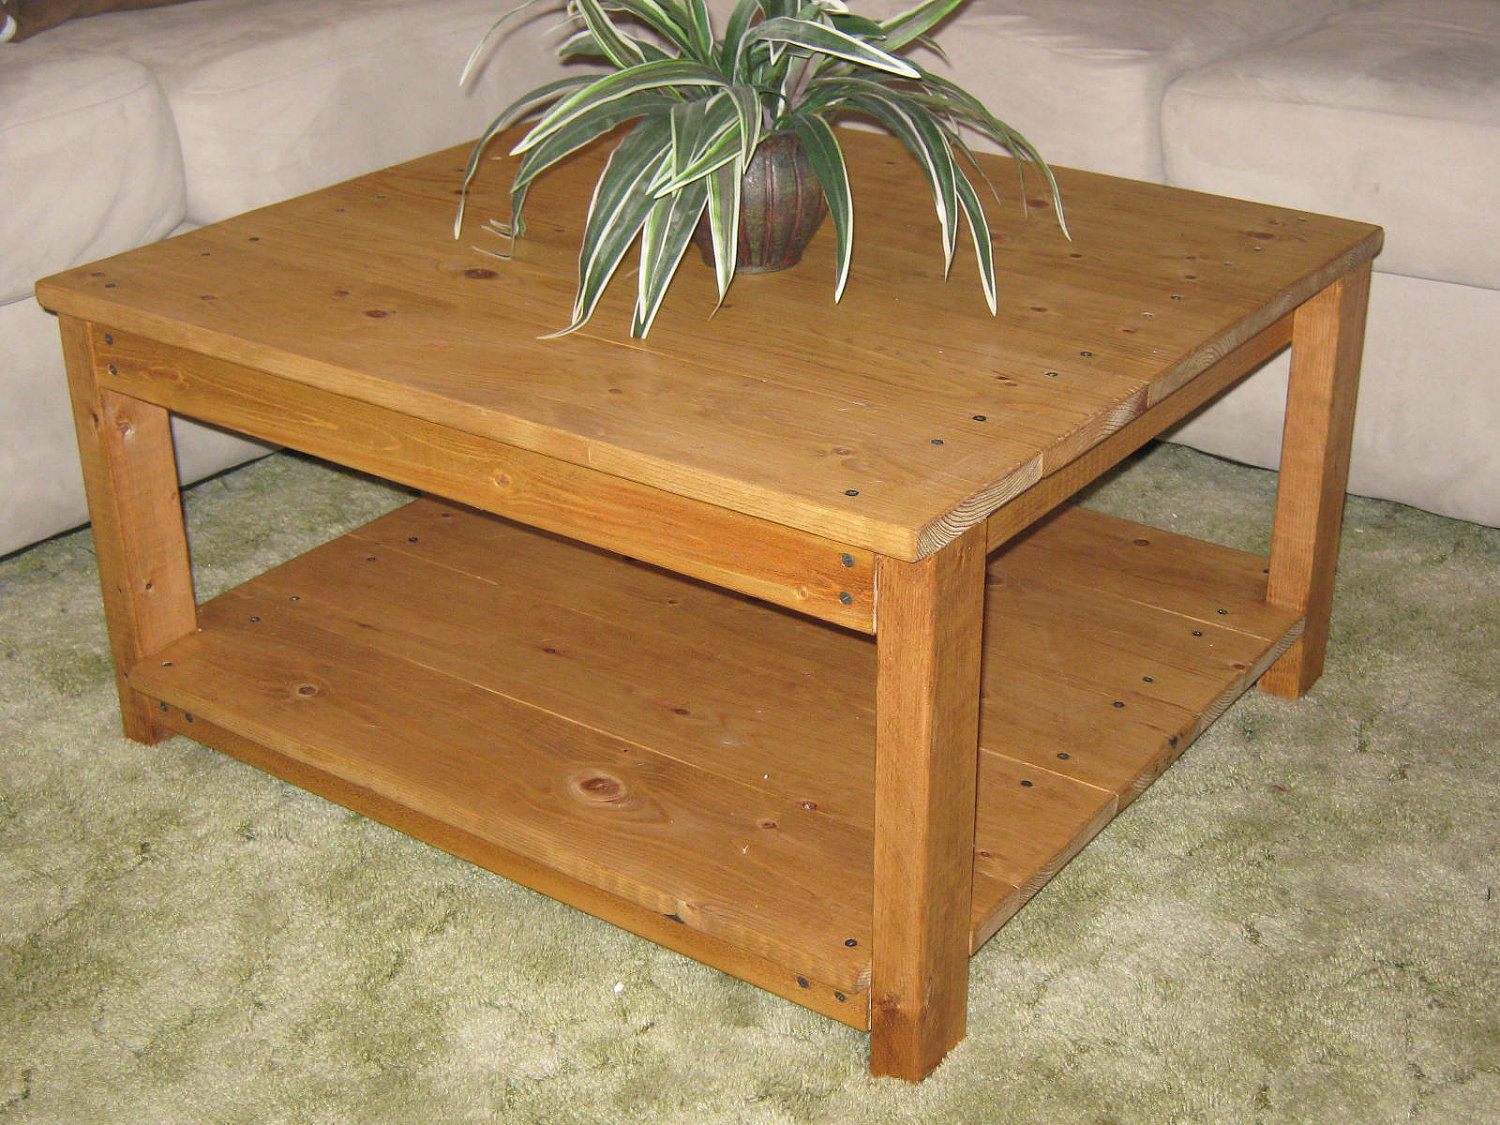 wooden coffee table design photo - 7